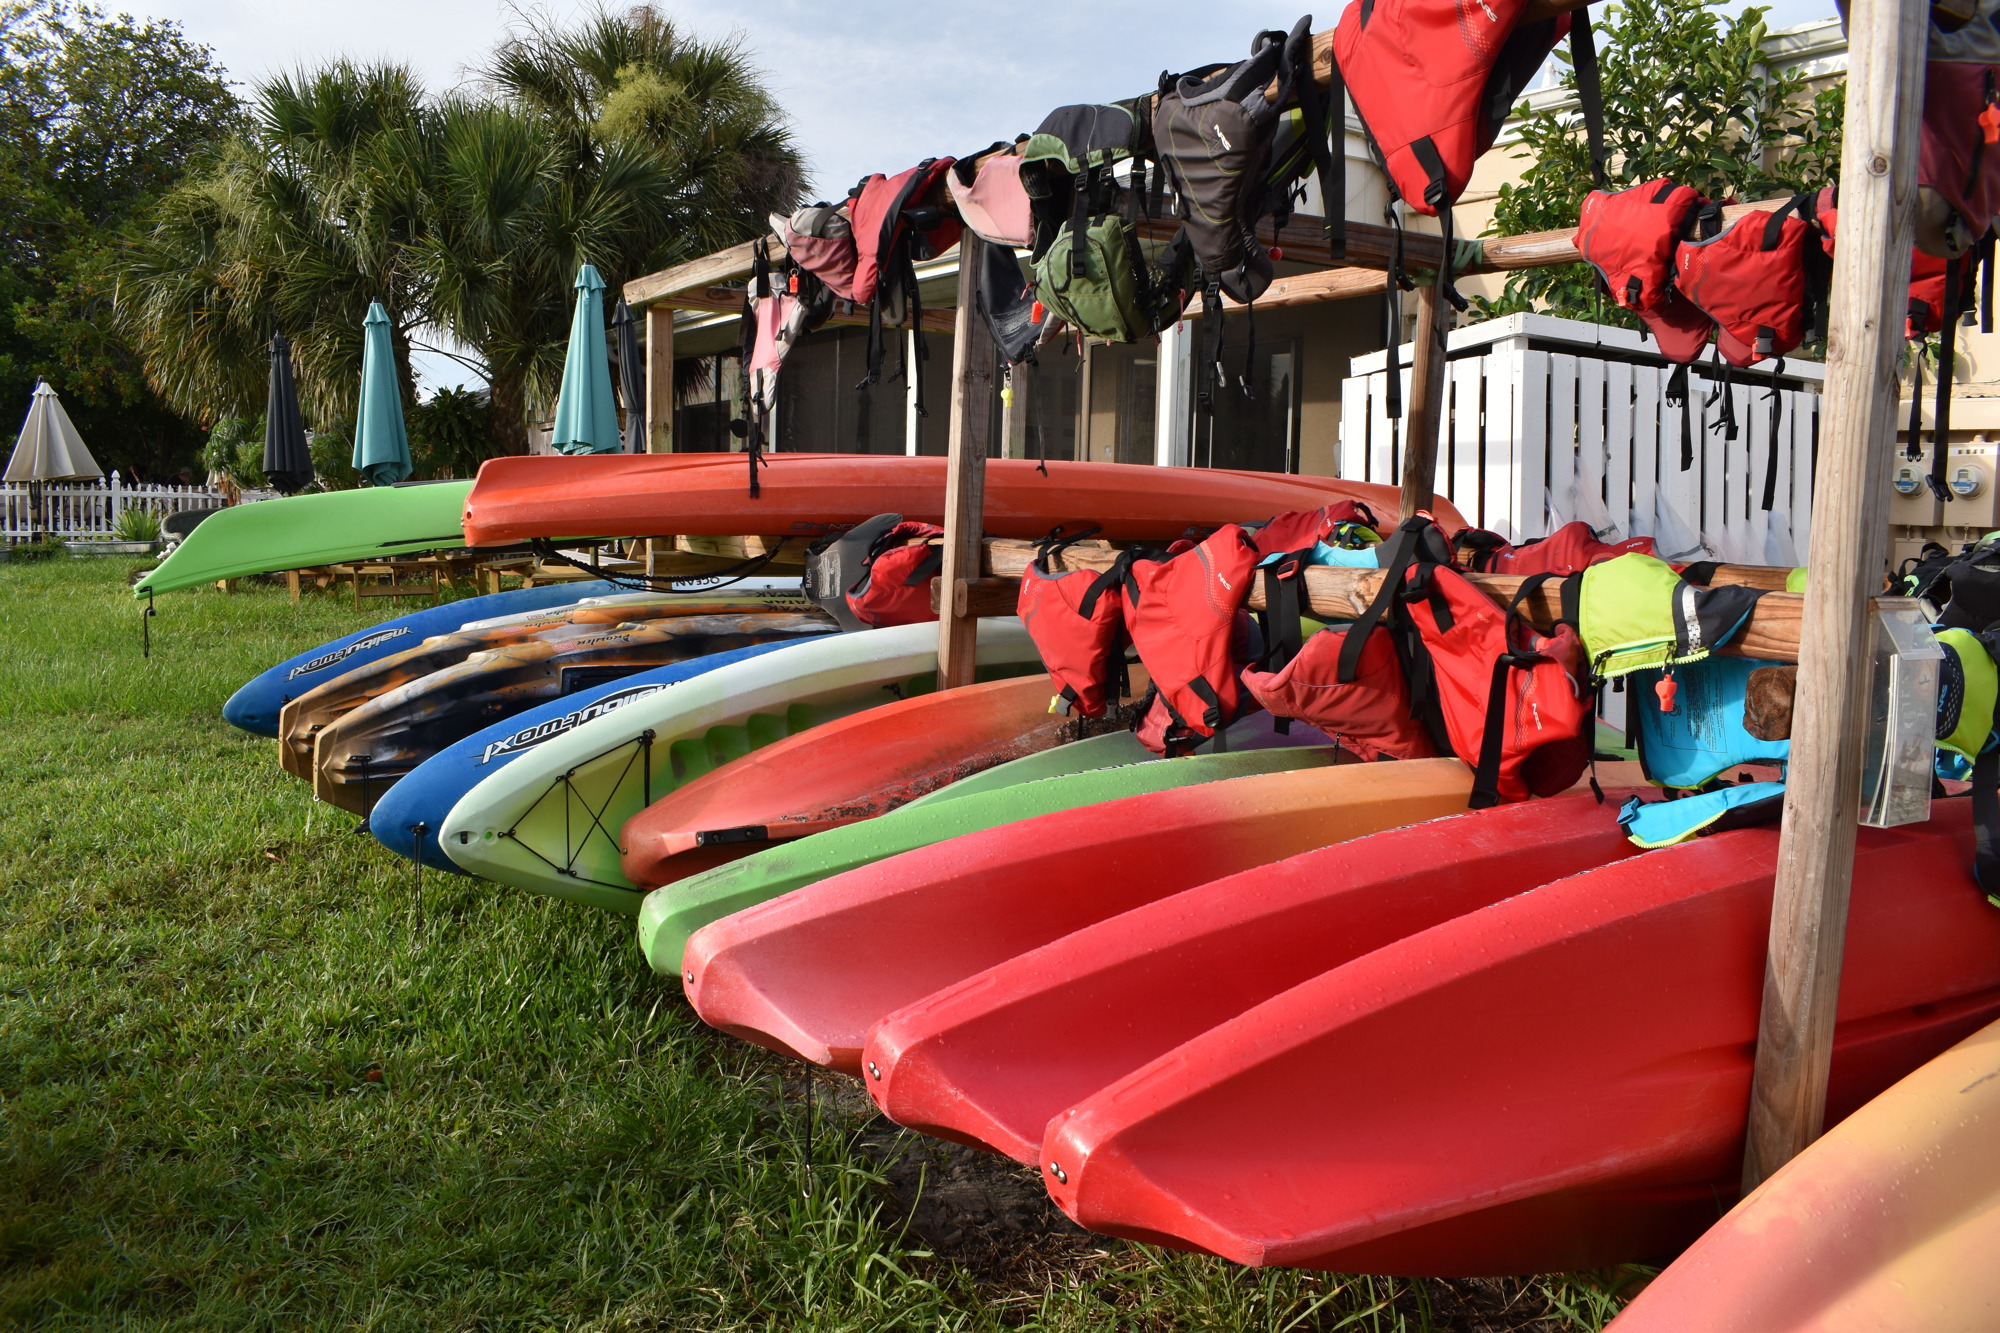 Shane Catts has operated Happy Paddler Kayak Tours since October 2013.